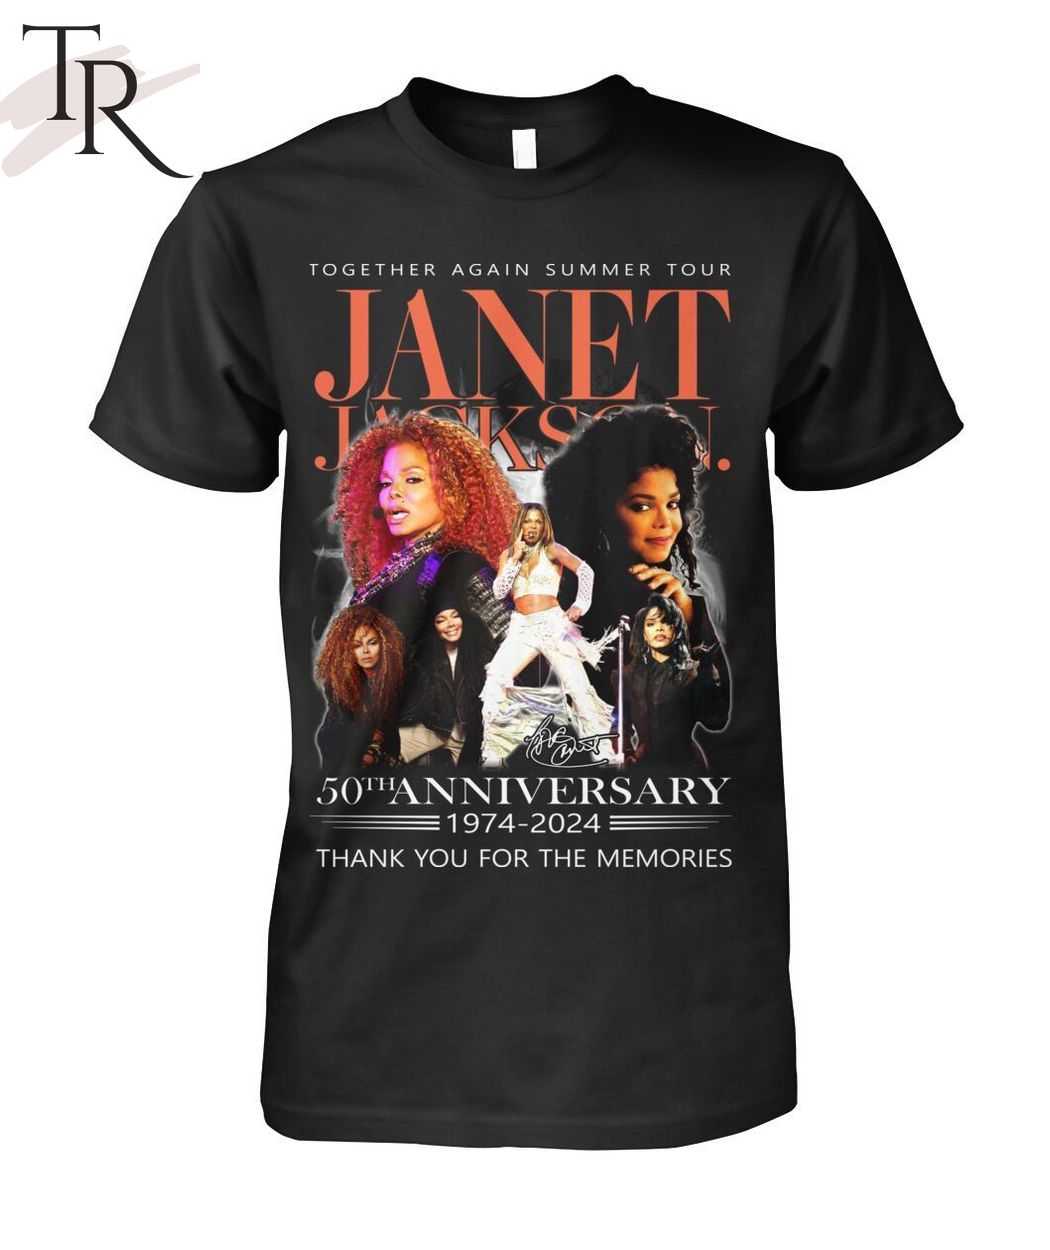 Together Again Summer Tour Janet Jackson 50th Anniversary 1974 - 2024 Thank You For The Memories T-Shirt